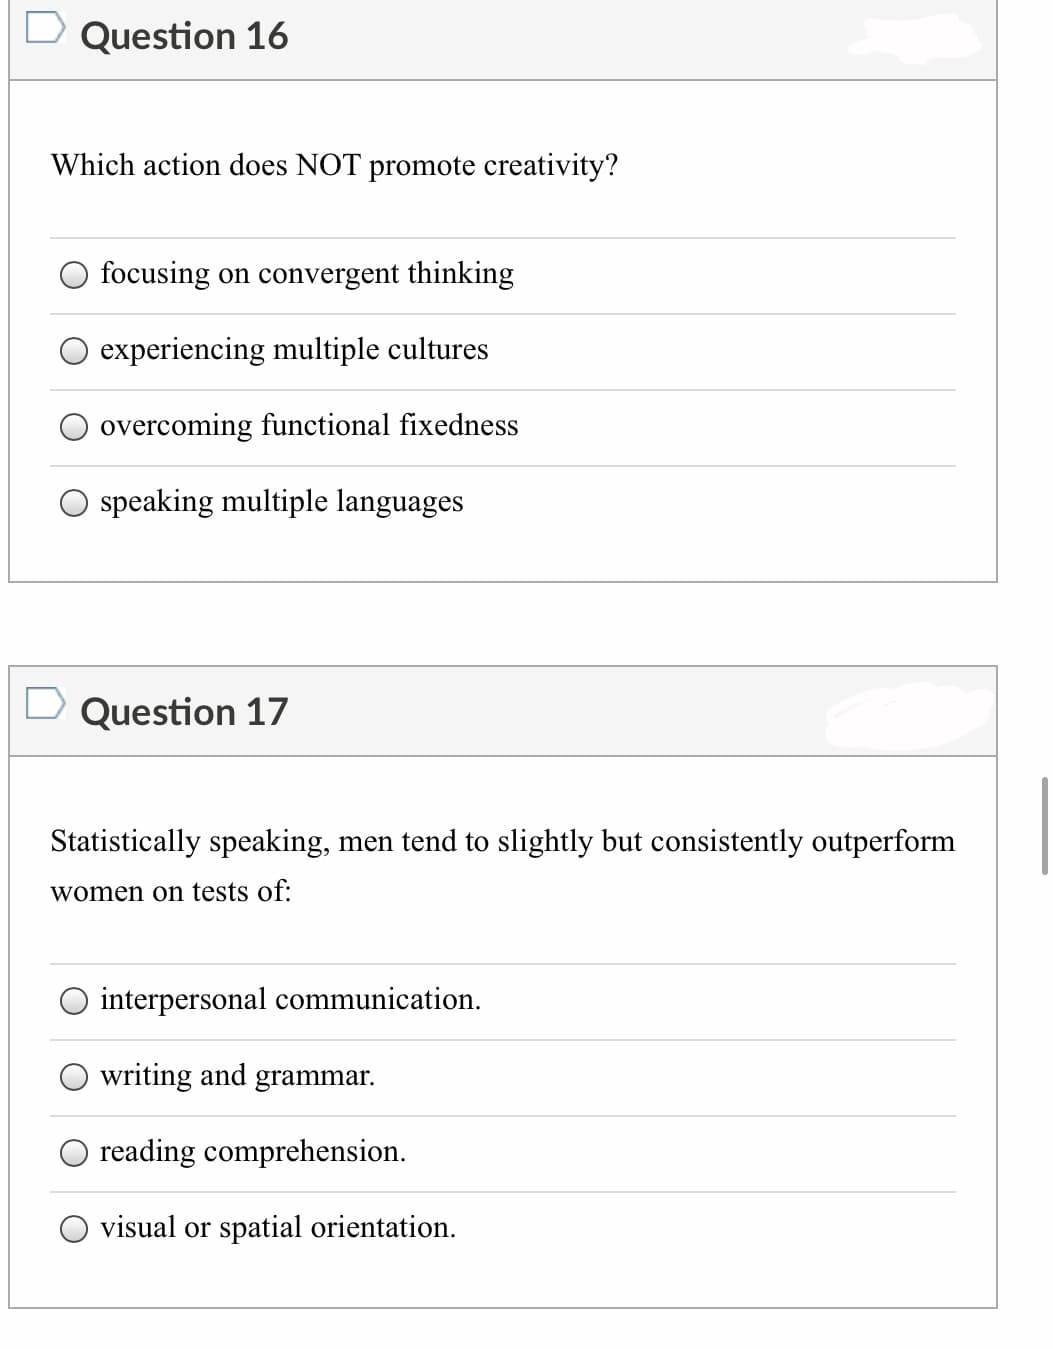 Question 16
Which action does NOT promote creativity?
focusing on convergent thinking
experiencing multiple cultures
overcoming functional fixedness
speaking multiple languages
Question 17
Statistically speaking, men tend to slightly but consistently outperform
women on tests of:
interpersonal communication.
writing and grammar.
reading comprehension.
visual or spatial orientation.
